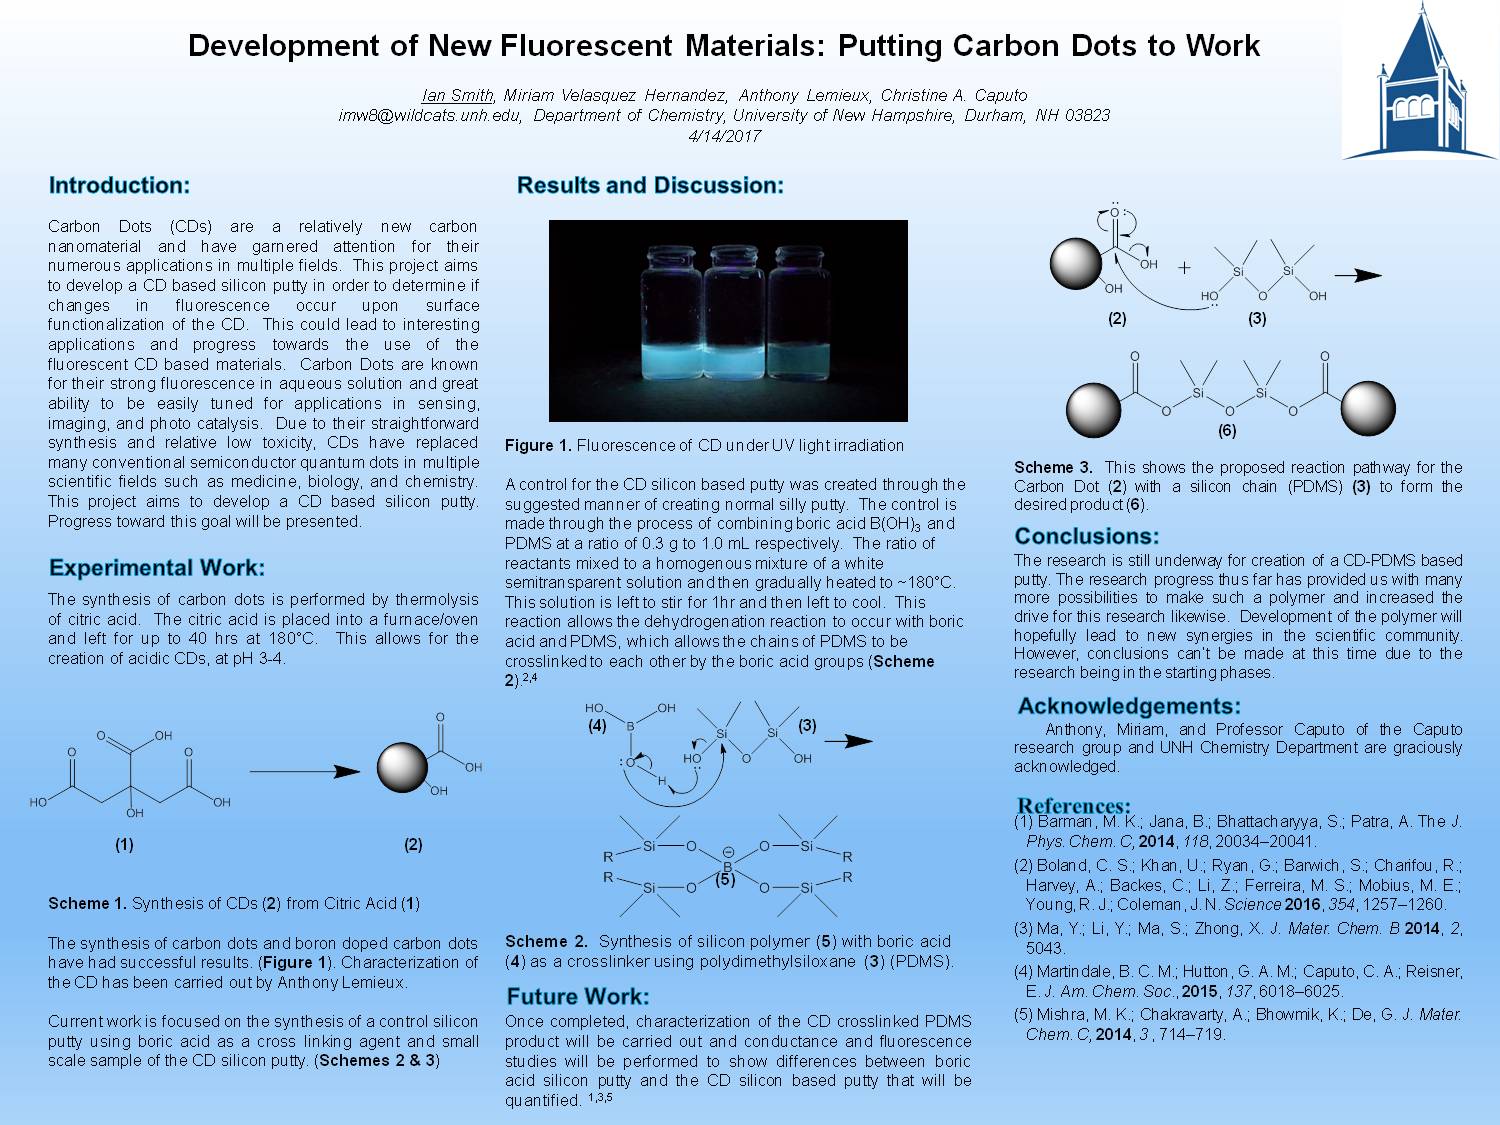 Development Of New Fluorescent Materials: Putting Carbon Dots To Work by imw8